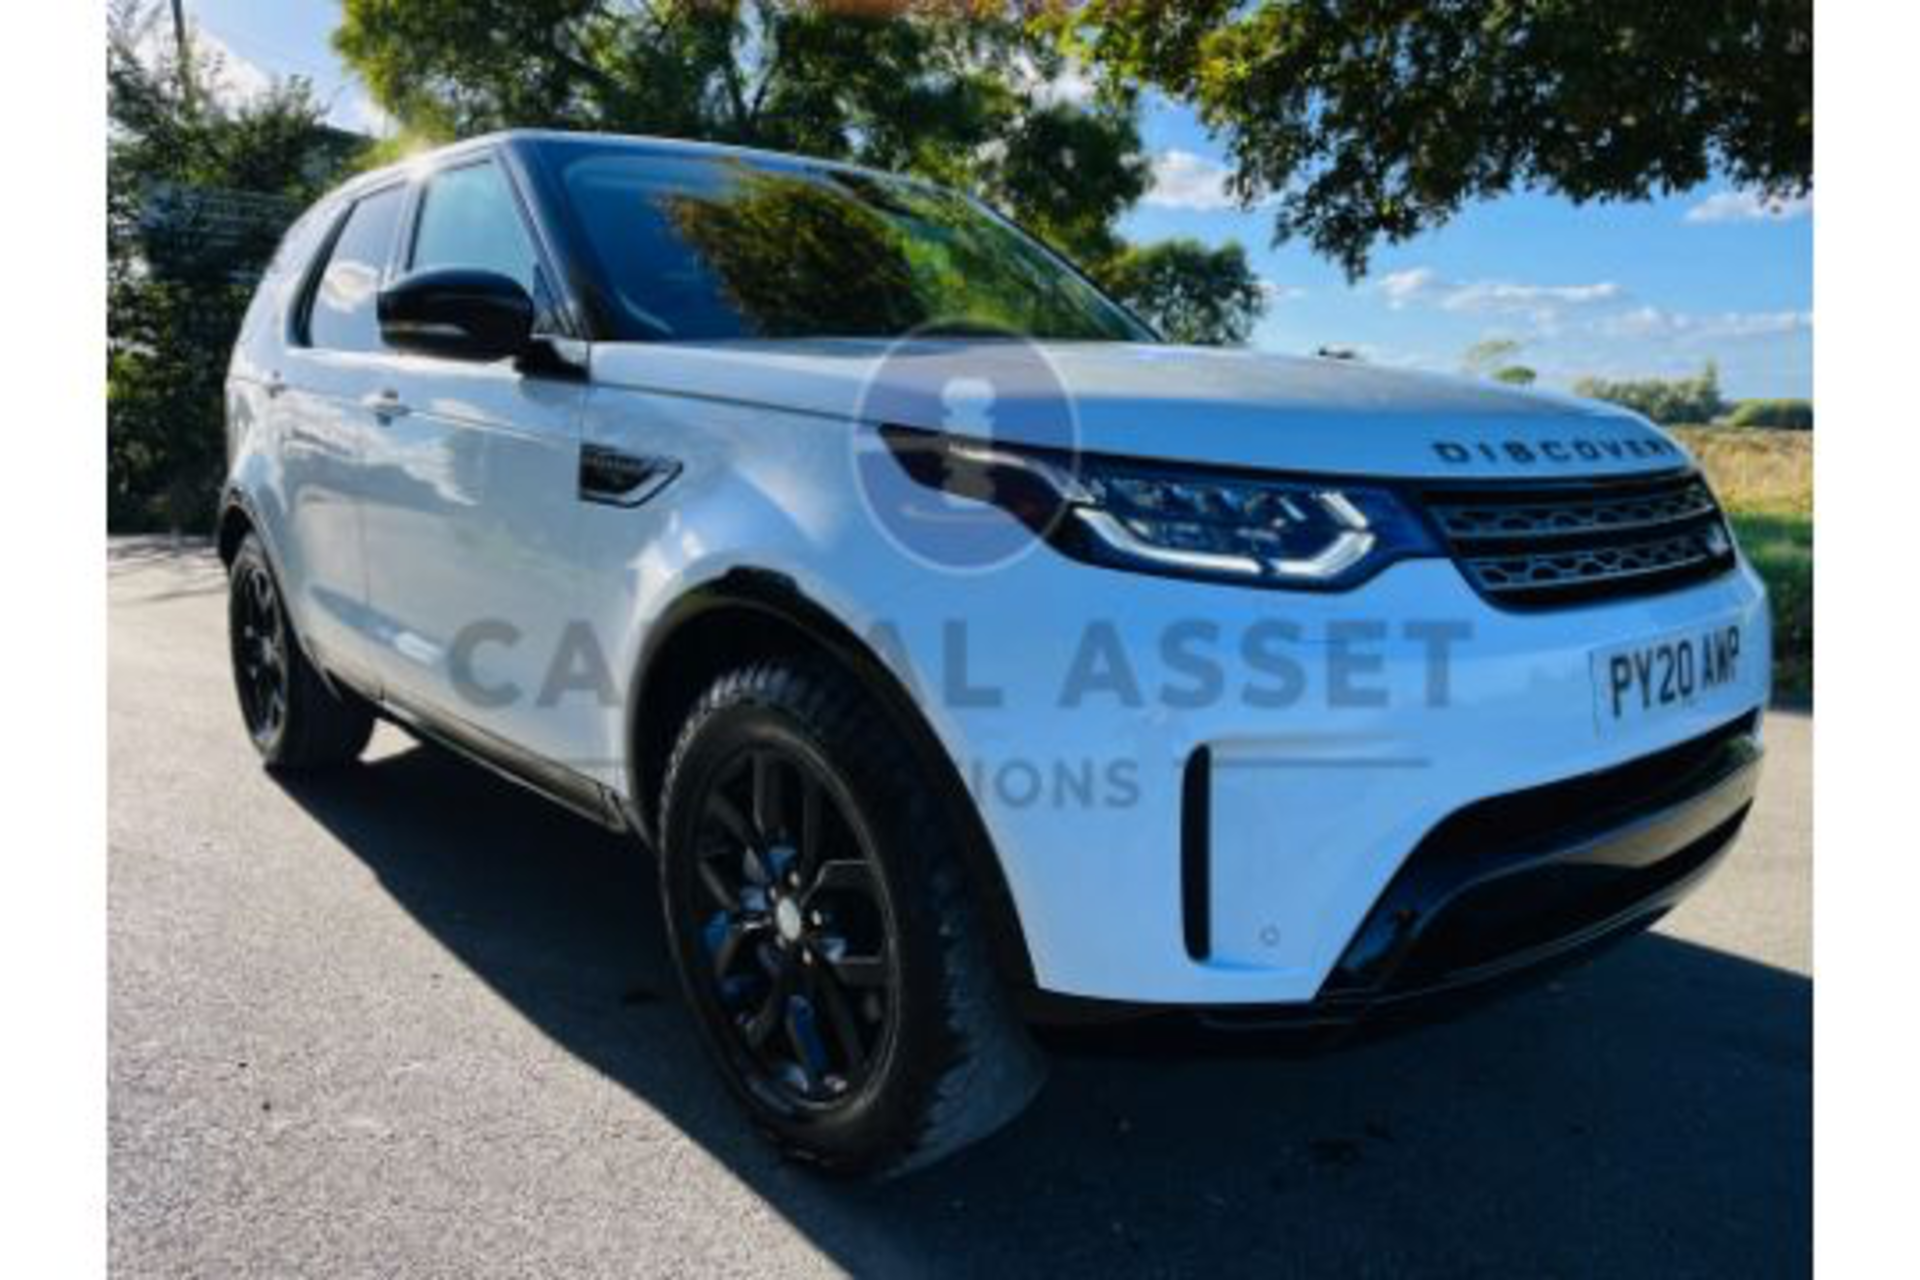 (ON SALE) LAND ROVER DISCOVERY 5 "SDV6 3.0" 'AUTO' 20 REG -1 OWNER -LEATHER- SAT NAV - NO VAT - Image 12 of 36